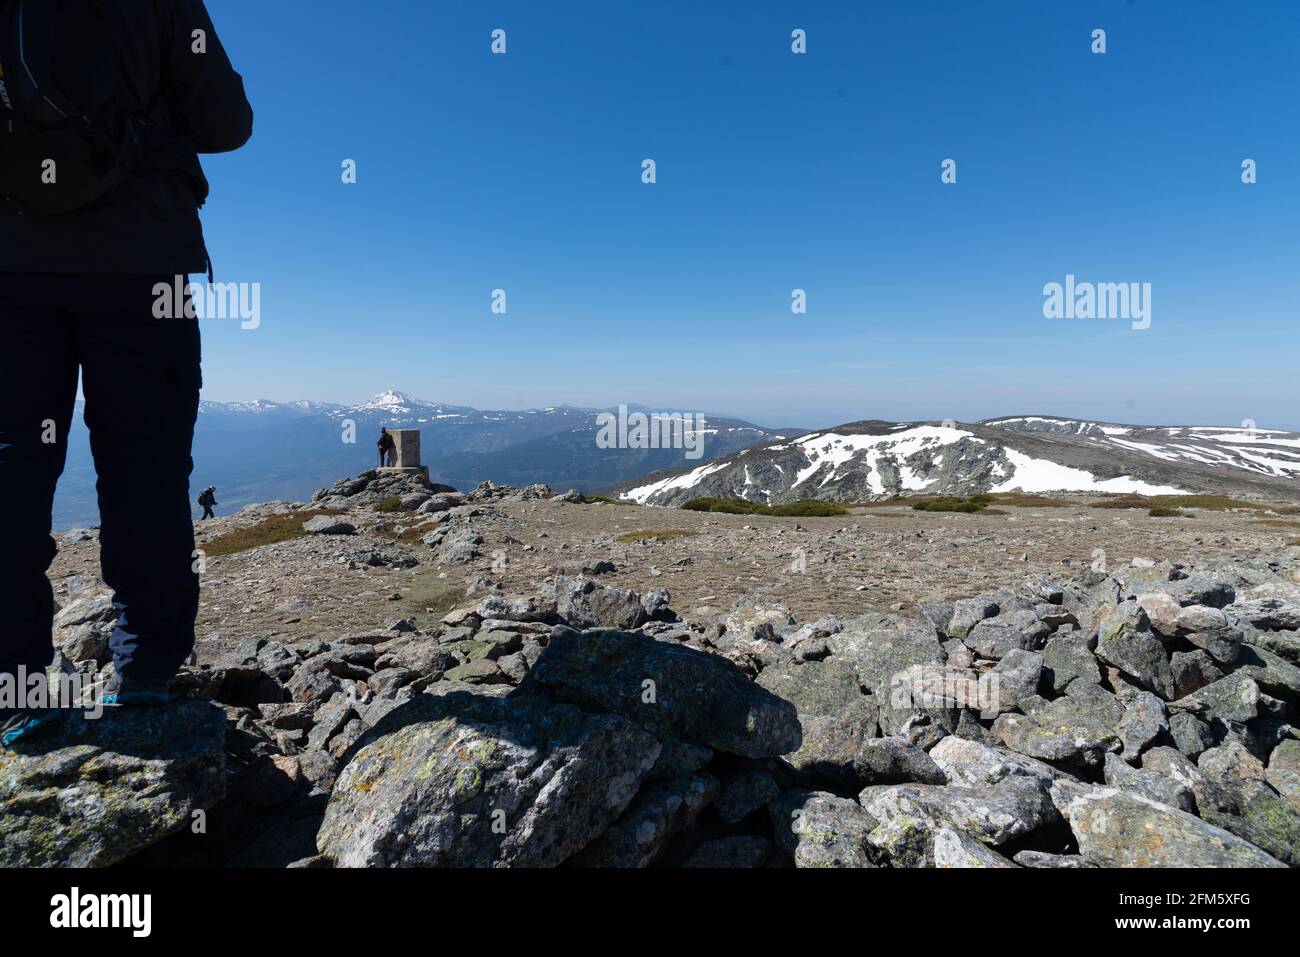 Landscape of rocks and mountains with clear sky in spring Stock Photo